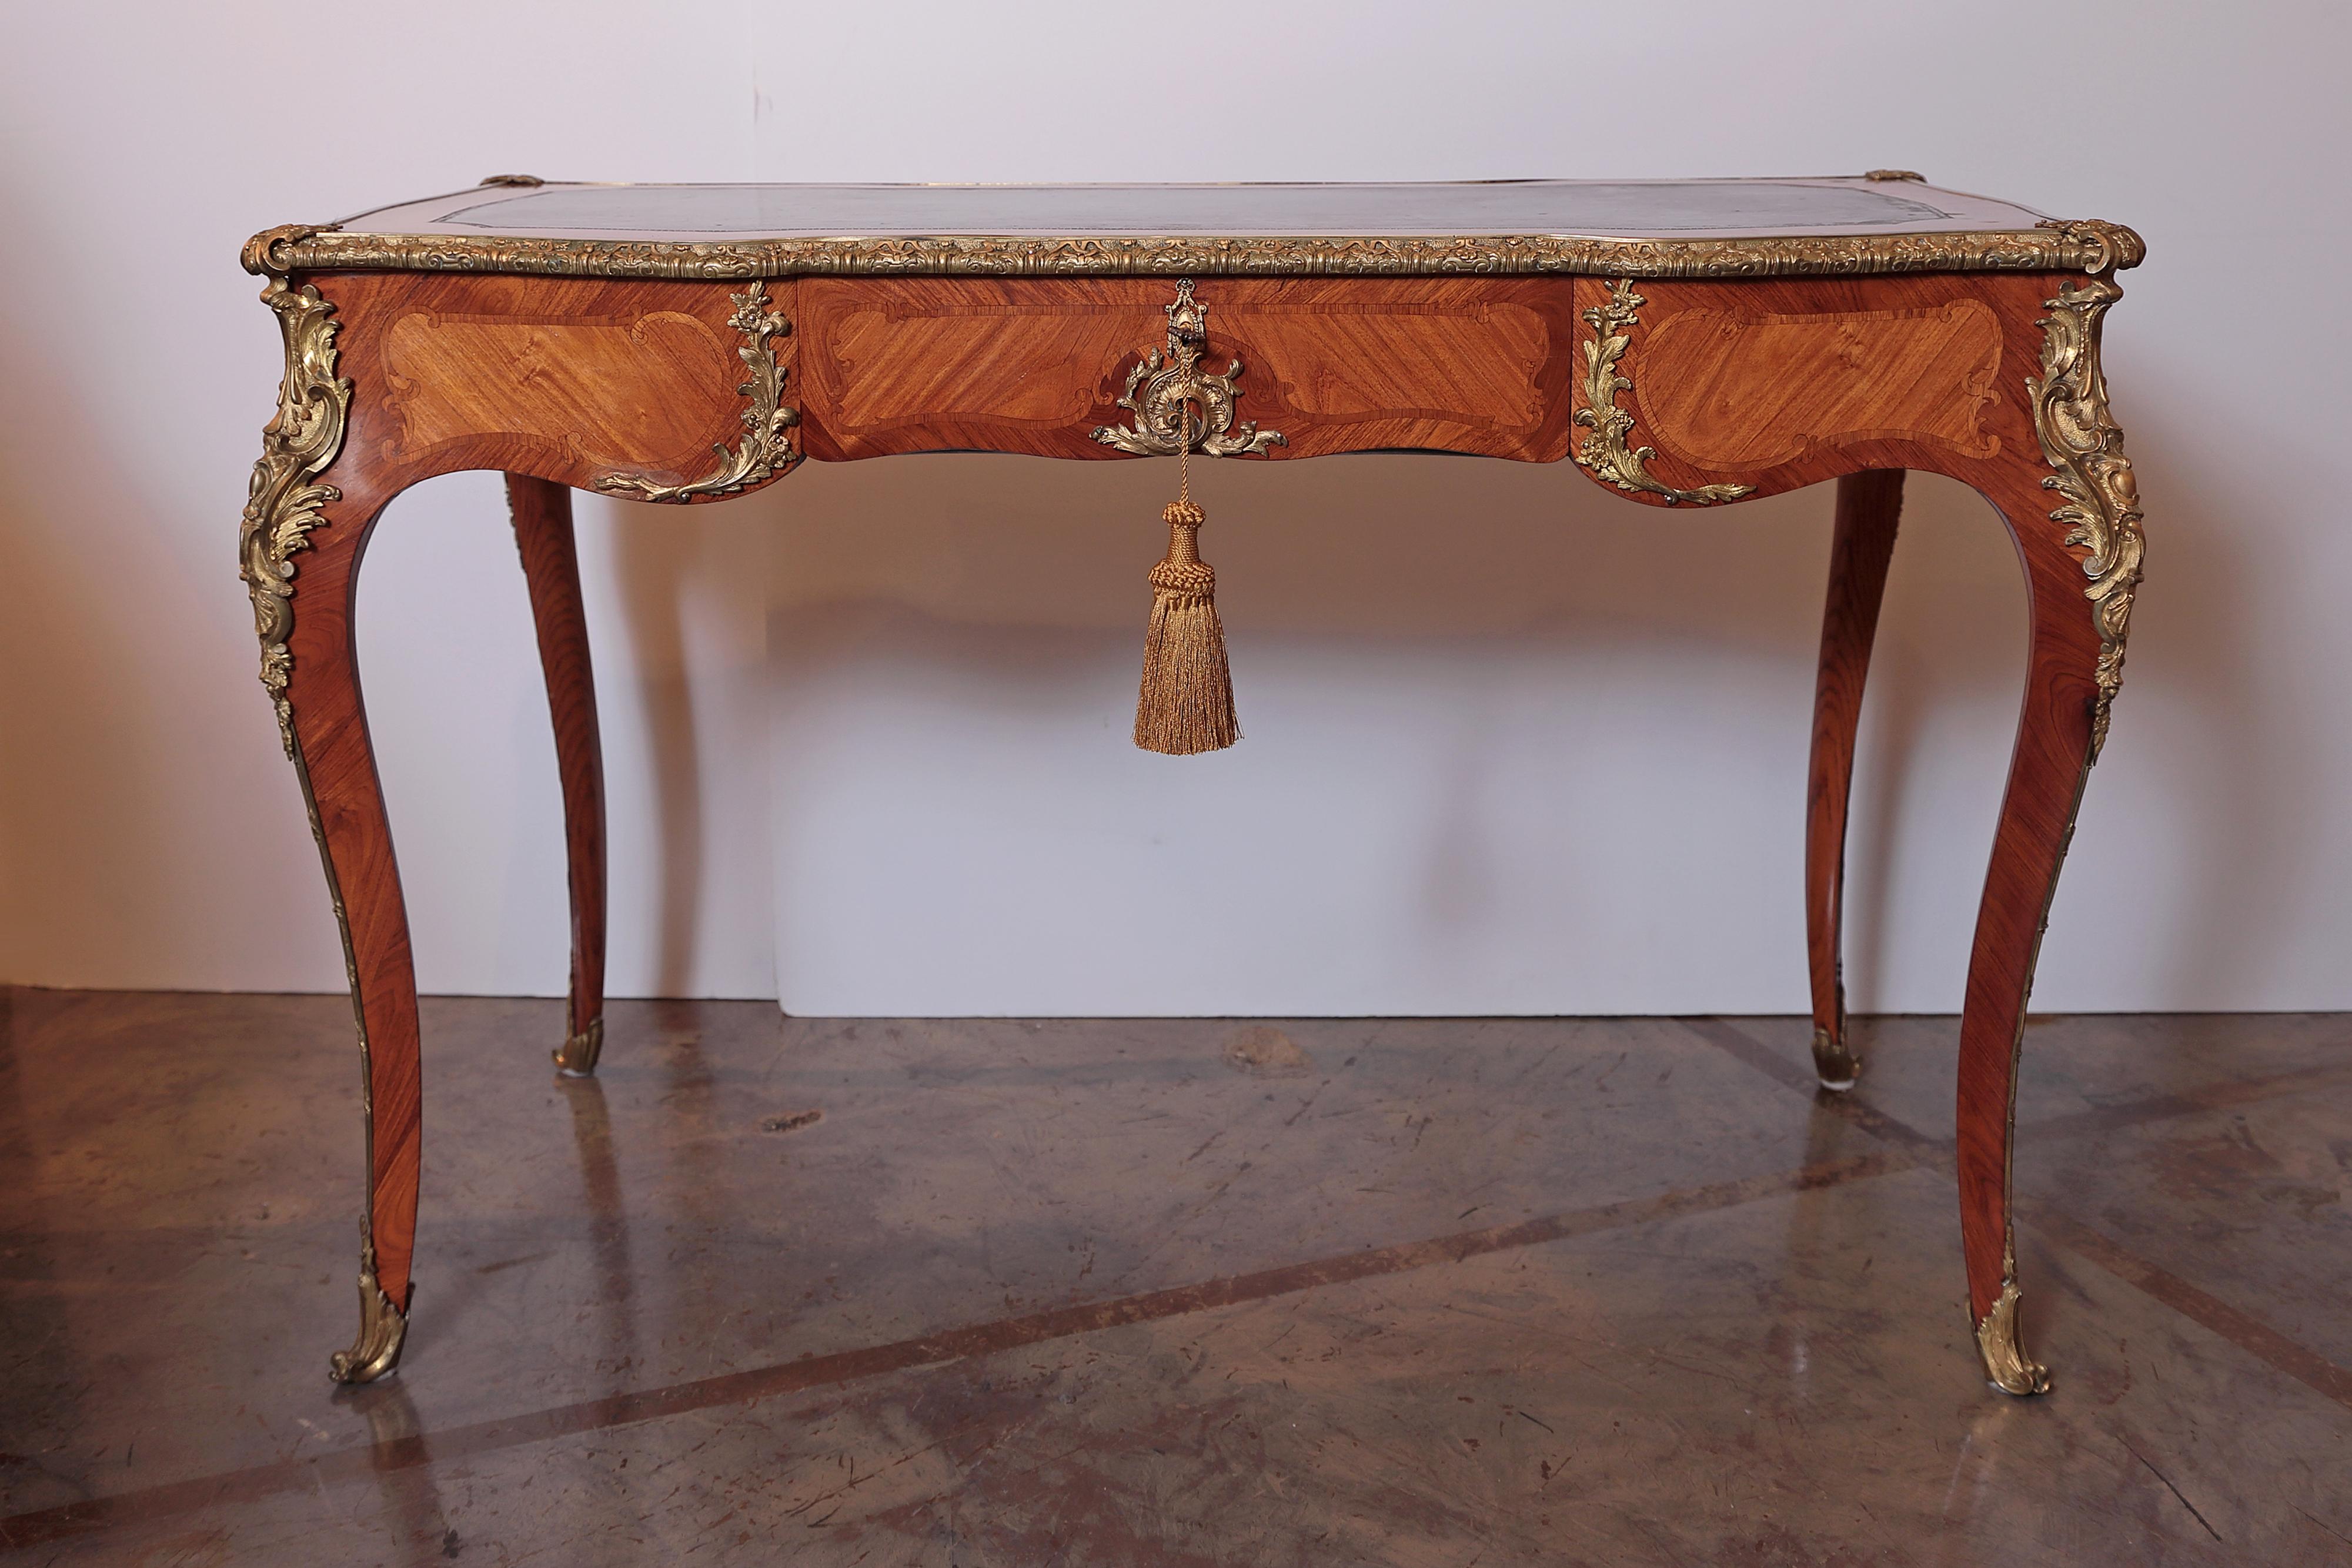 19th century French writing desk by Paul Sormani. Kingwood with parquetry inlay and a leather top. Three drawers and fine gilt bronze mounts.